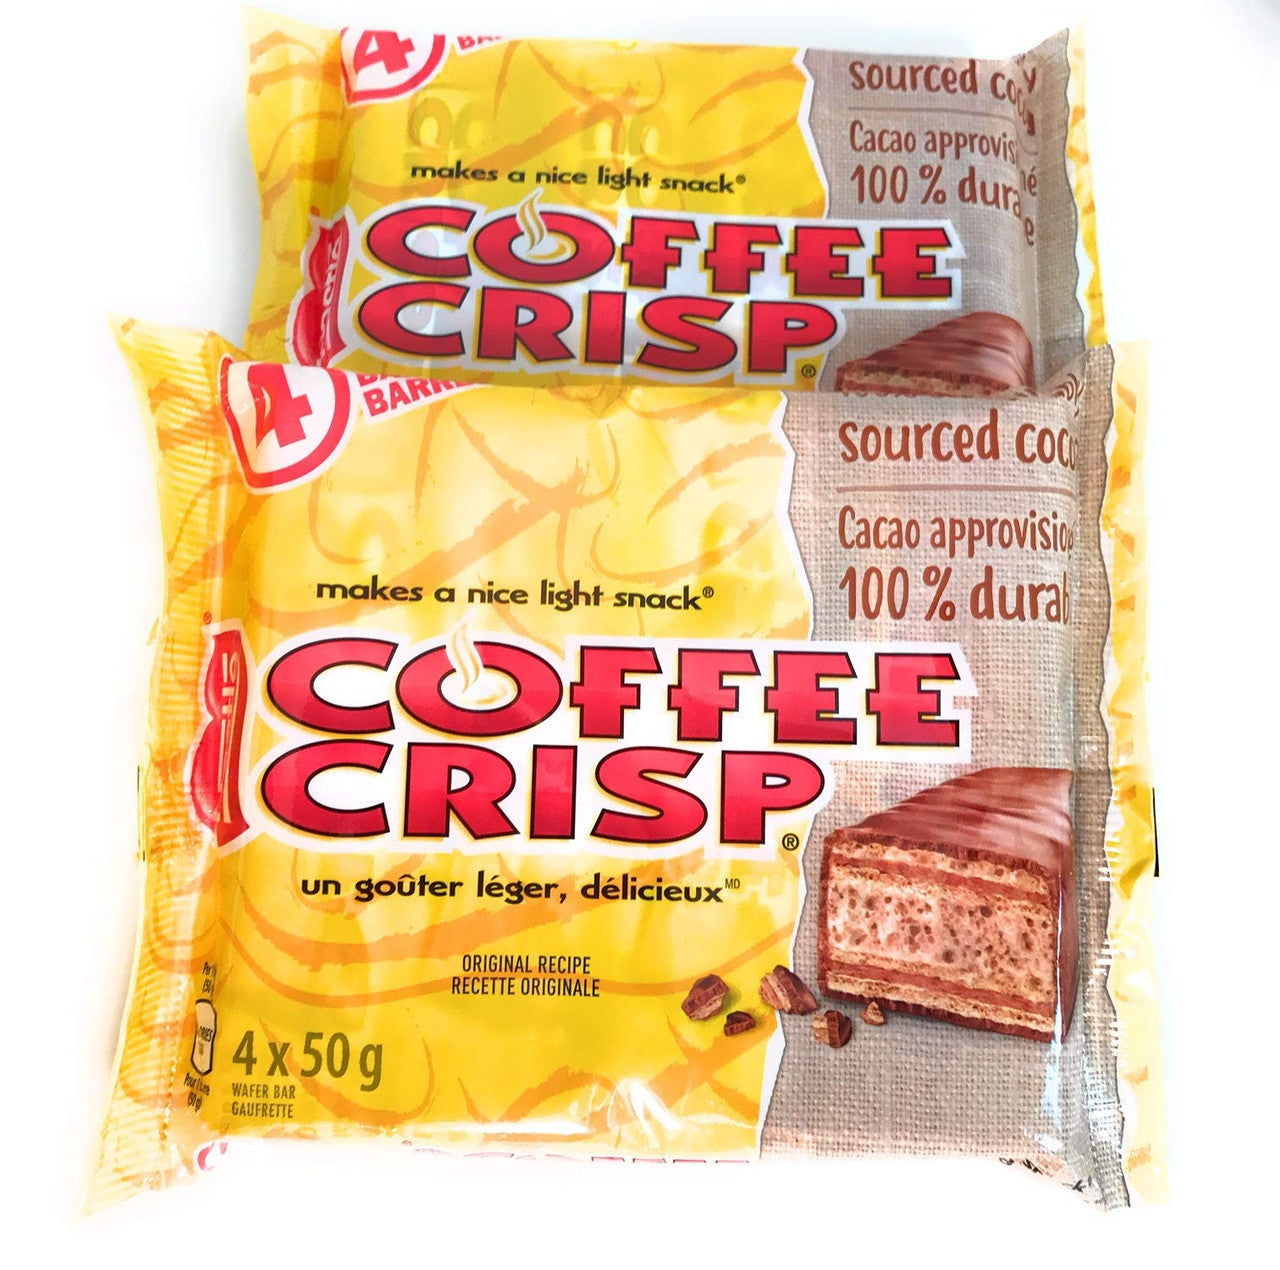 Nestle Coffee Crisp Chocolate Bars 2 pack, 8-50g Bars in Total, (Imported from Canada)